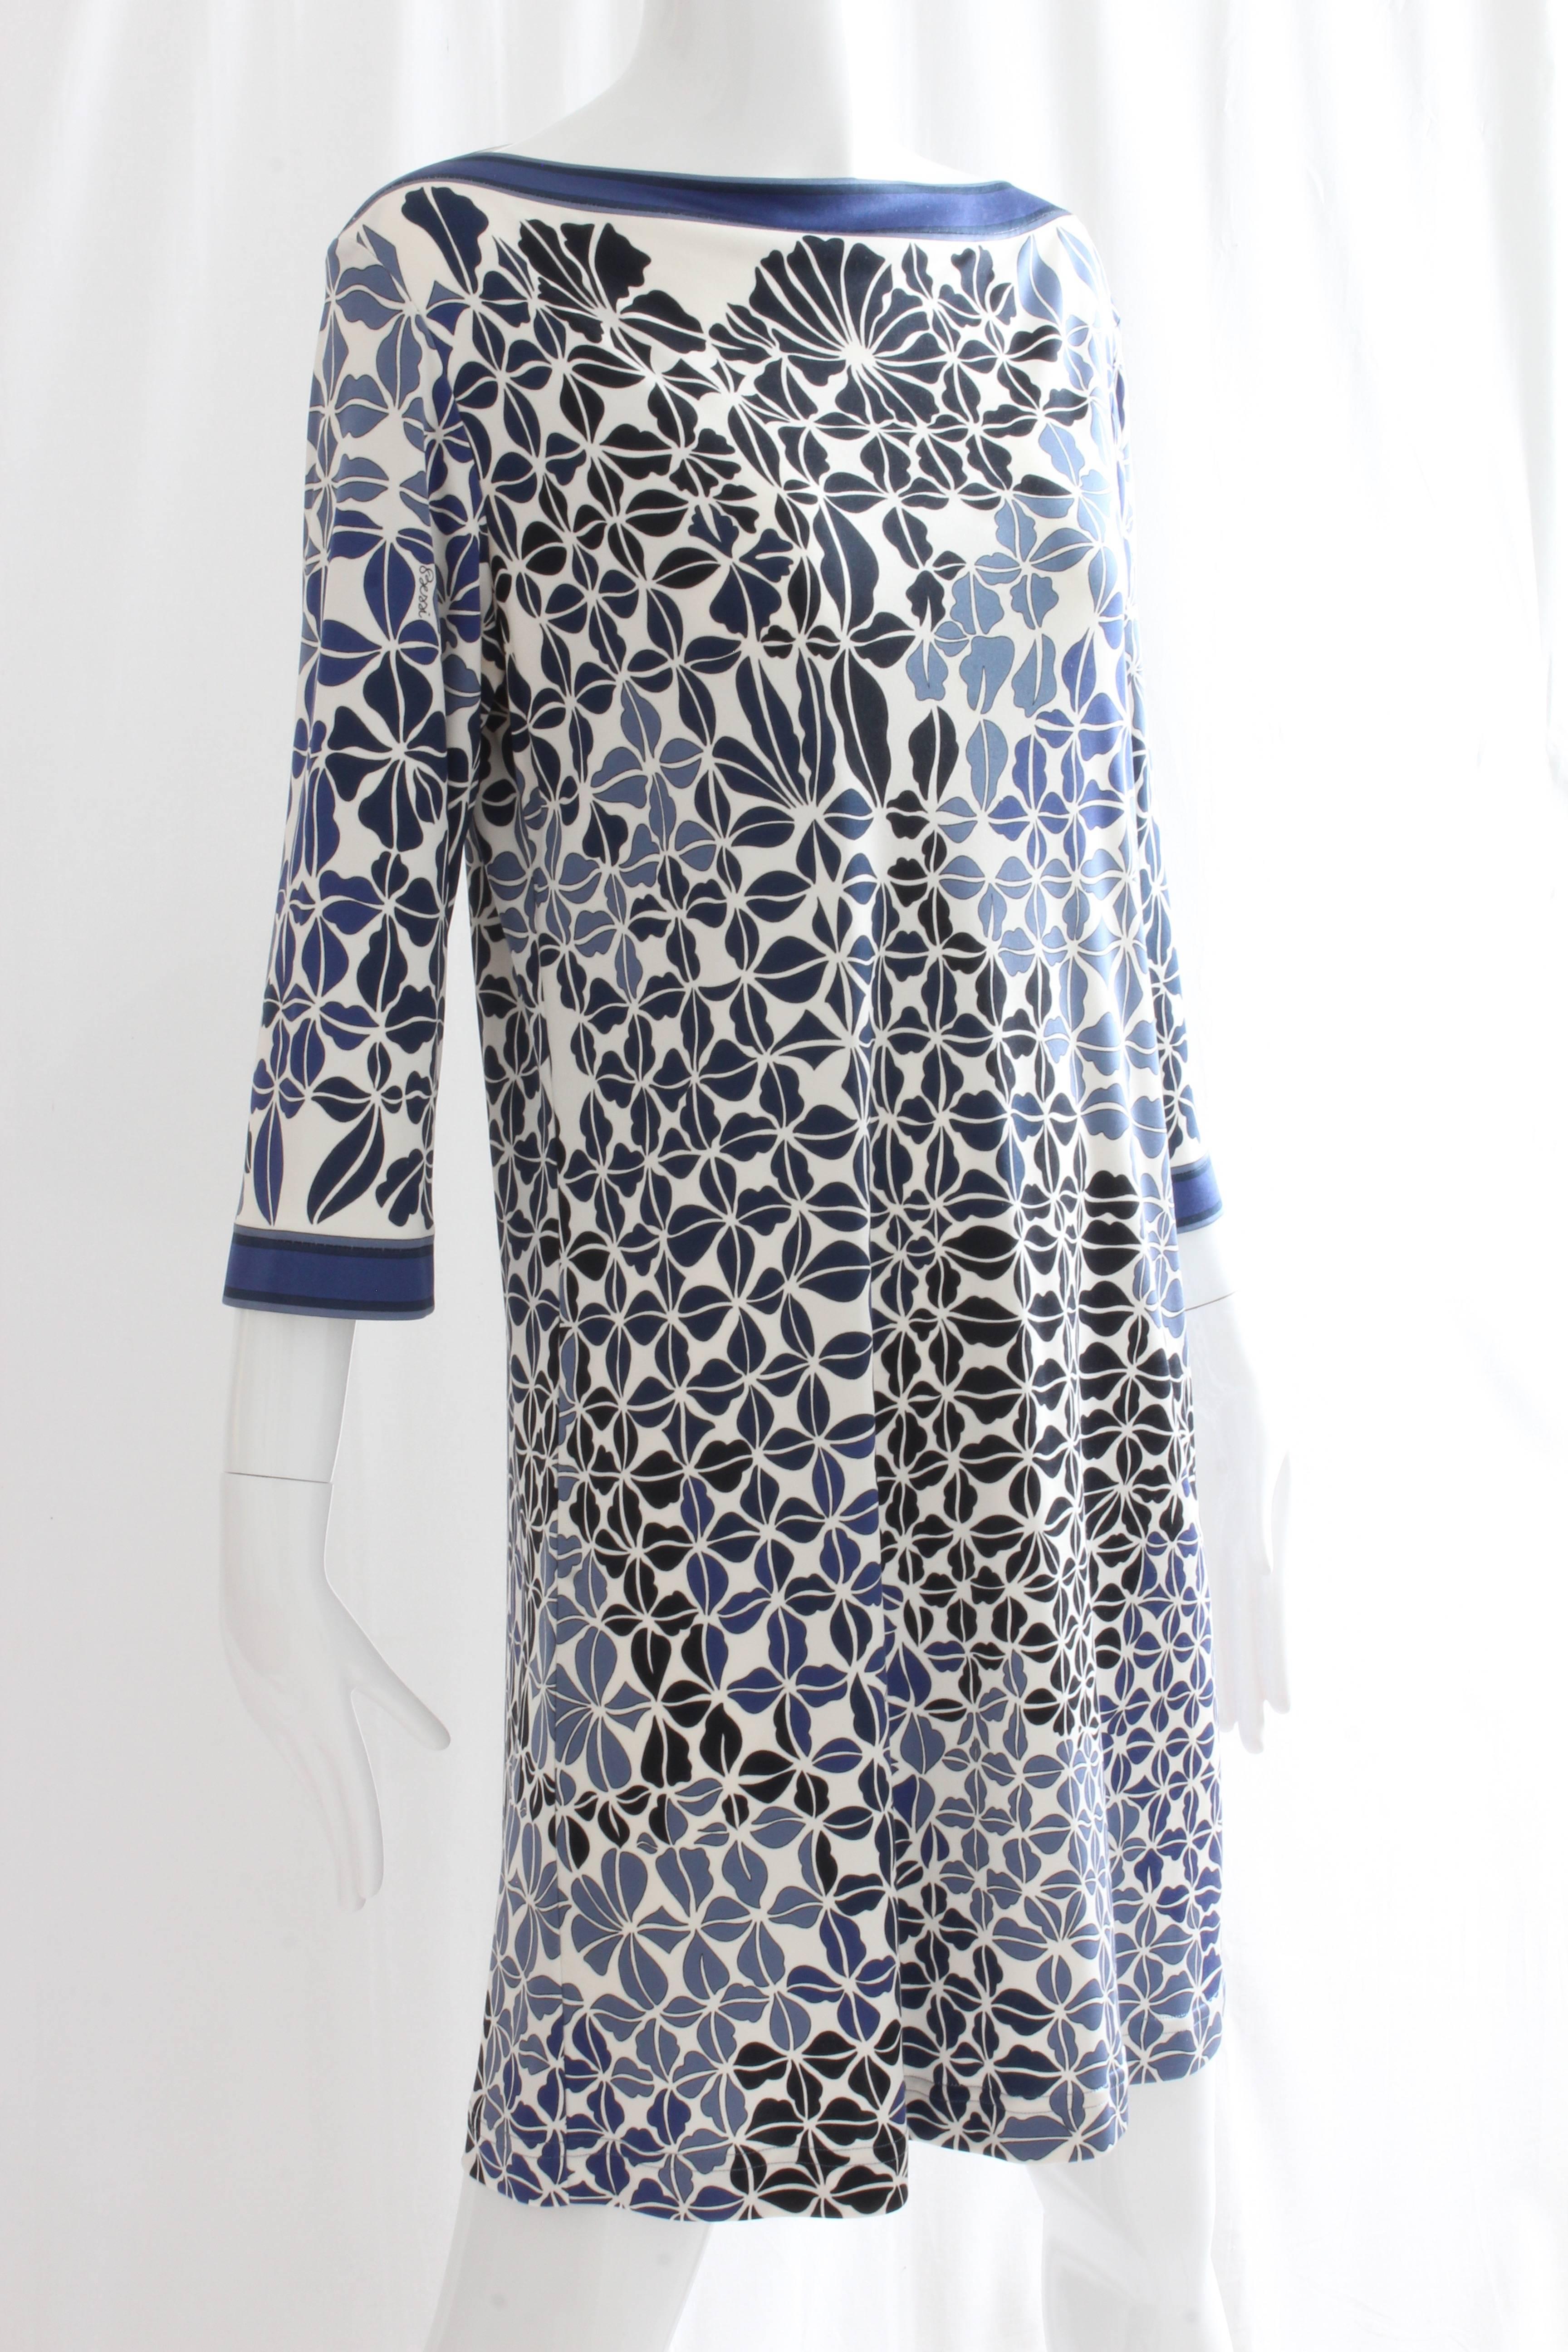 Here's a pretty little dress from Averardo Bessi, likely made in the late 1990s.  Made from silk jersey, it's unlined and so easy to wear.  Perfect for summer parties and travel.  No designer label, but the print is signed BESSI, typical of the